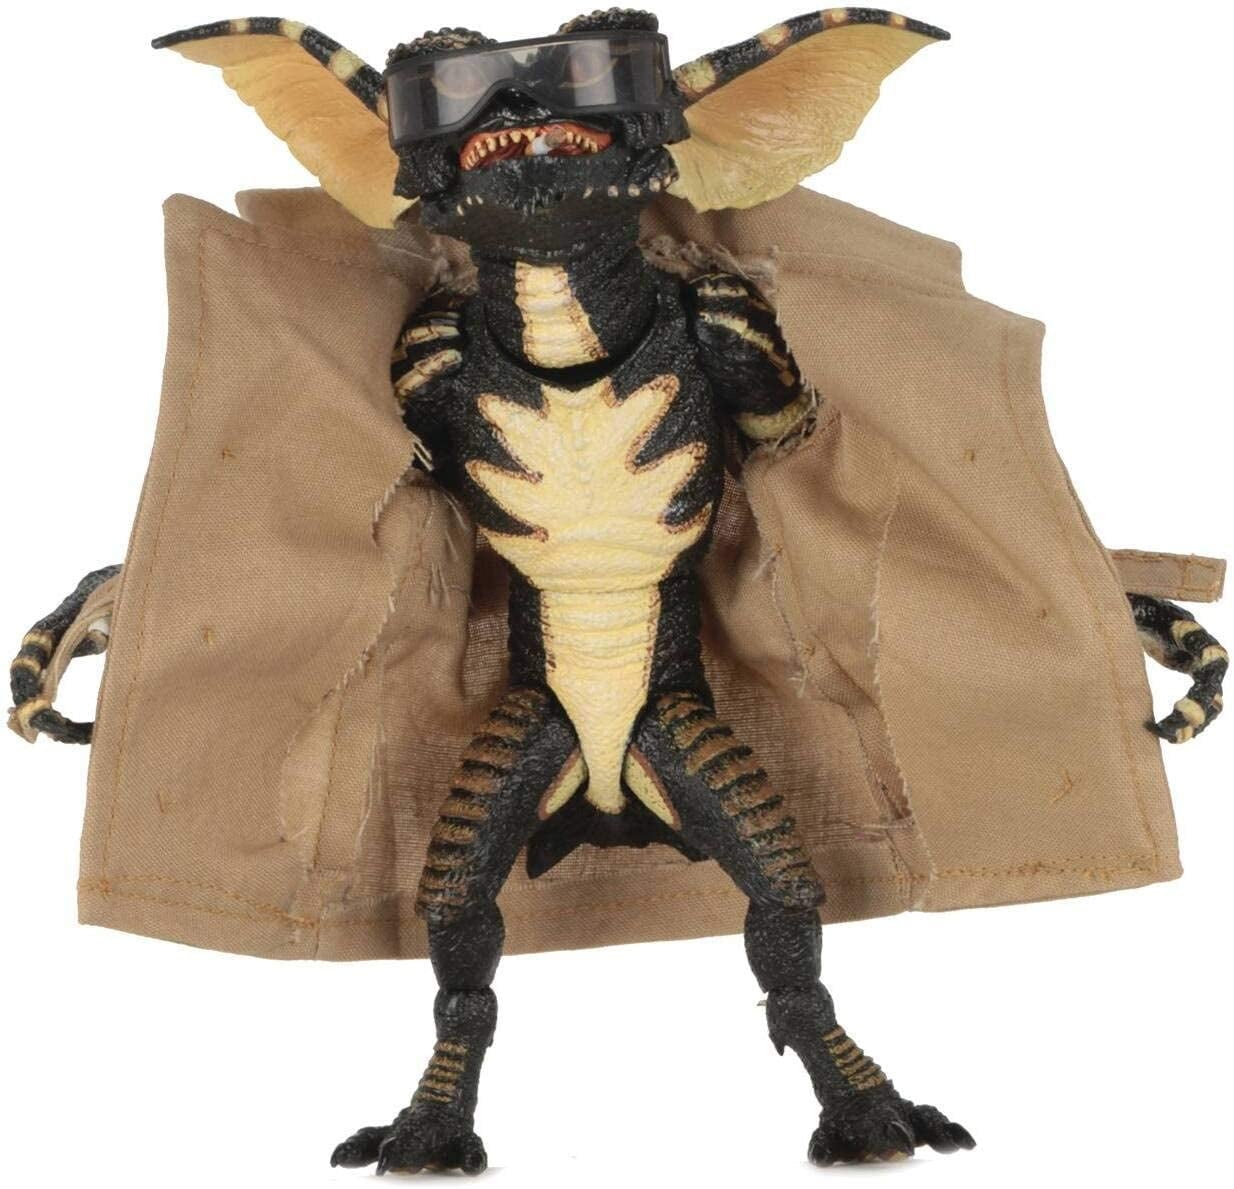 NEW BOXED NECA Gremlins 7" Action Figure Ultimate Gizmo 